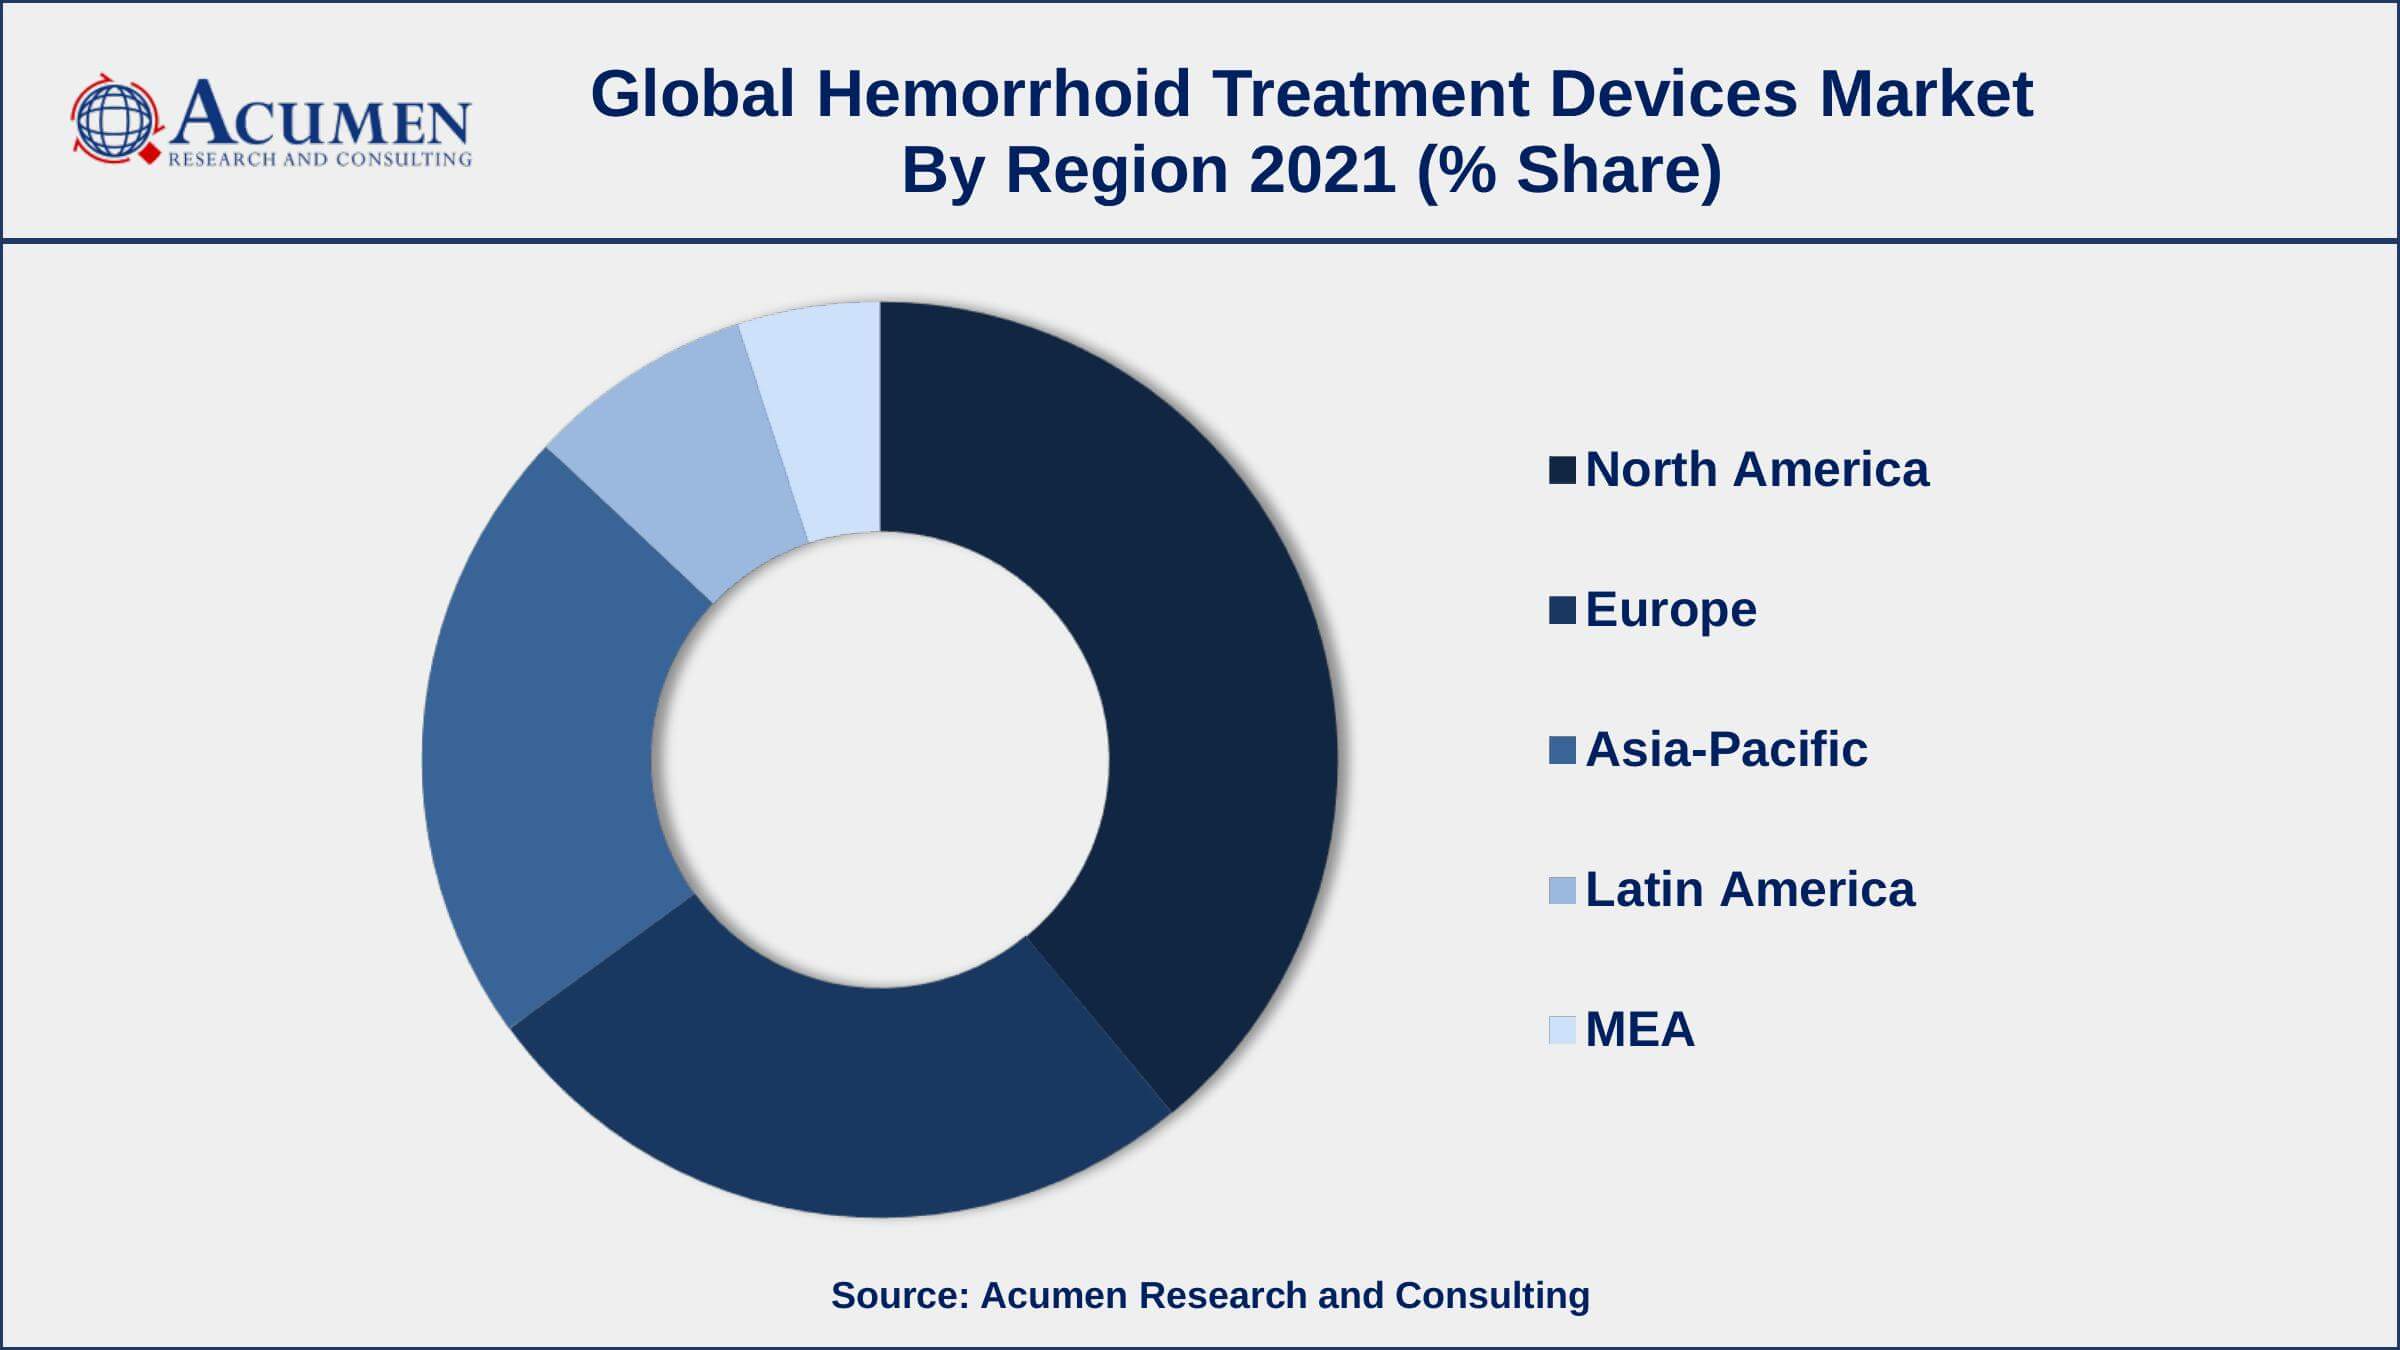 Rising incidence of hemorrhoids, drives the hemorrhoid treatment devices market size